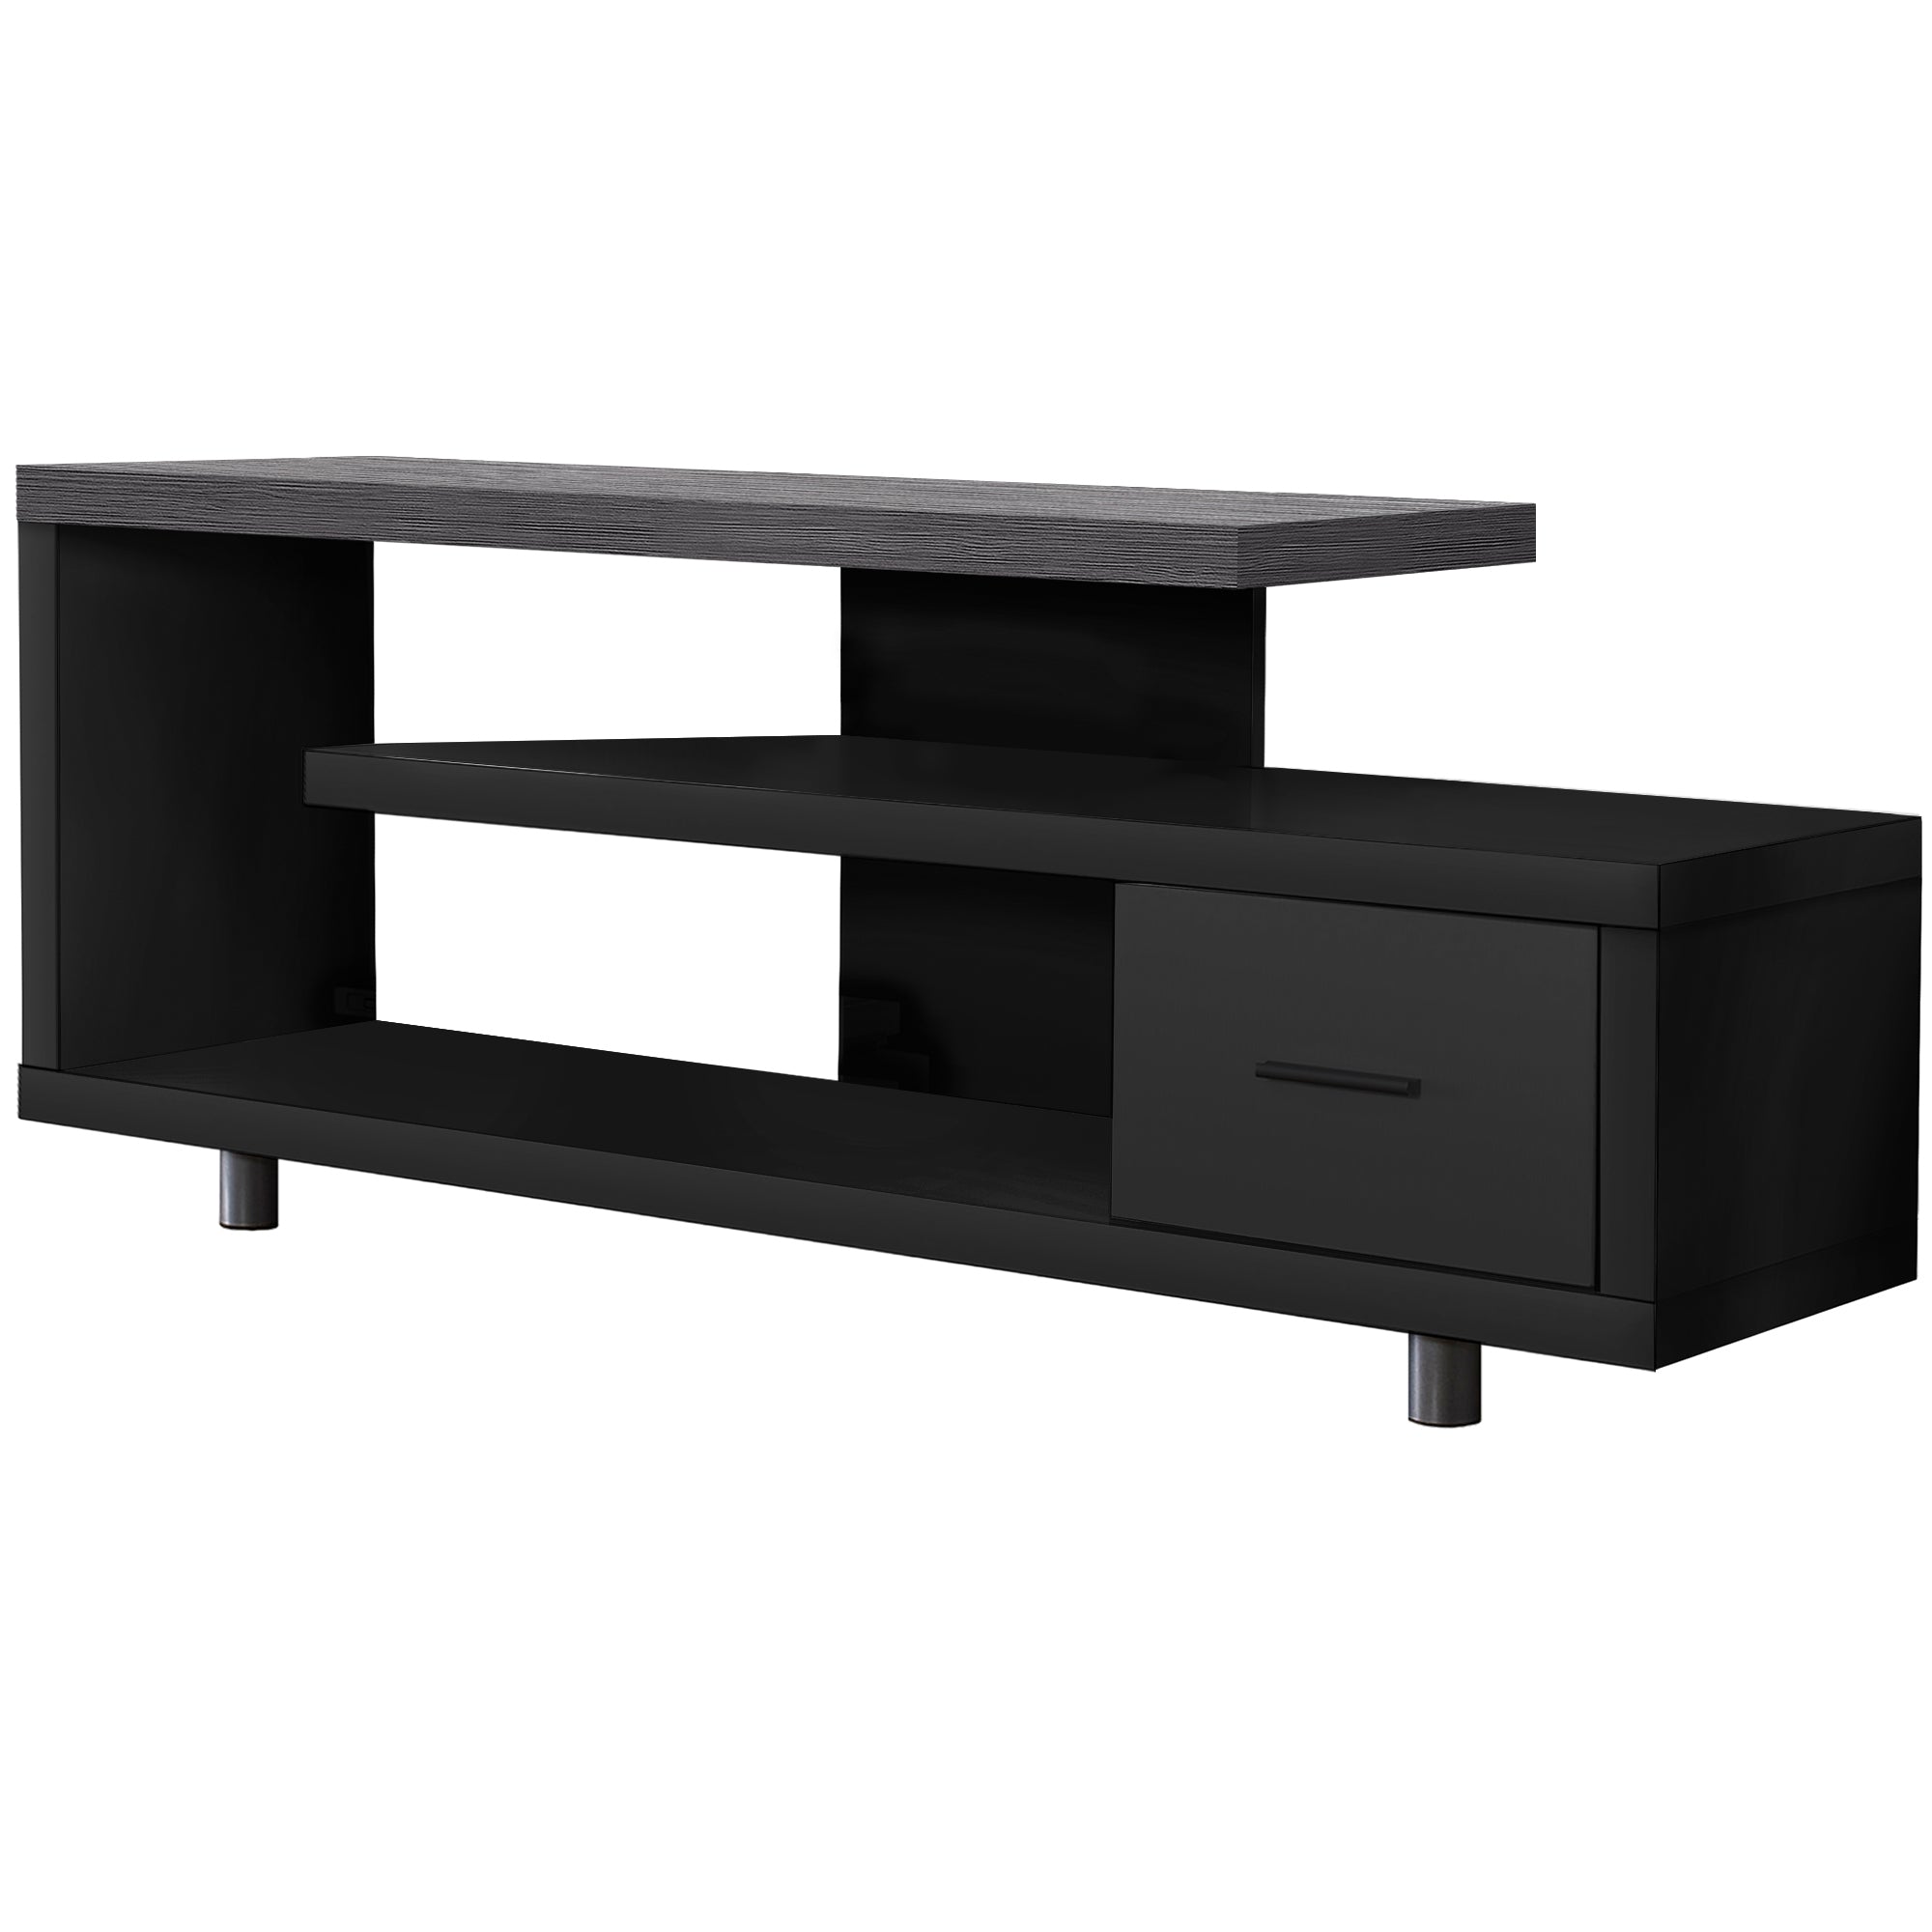 MN-702575    Tv Stand, 60 Inch, Console, Media Entertainment Center, Storage Cabinet, Living Room, Bedroom, Laminate, Metal, Black, Grey, Contemporary, Modern